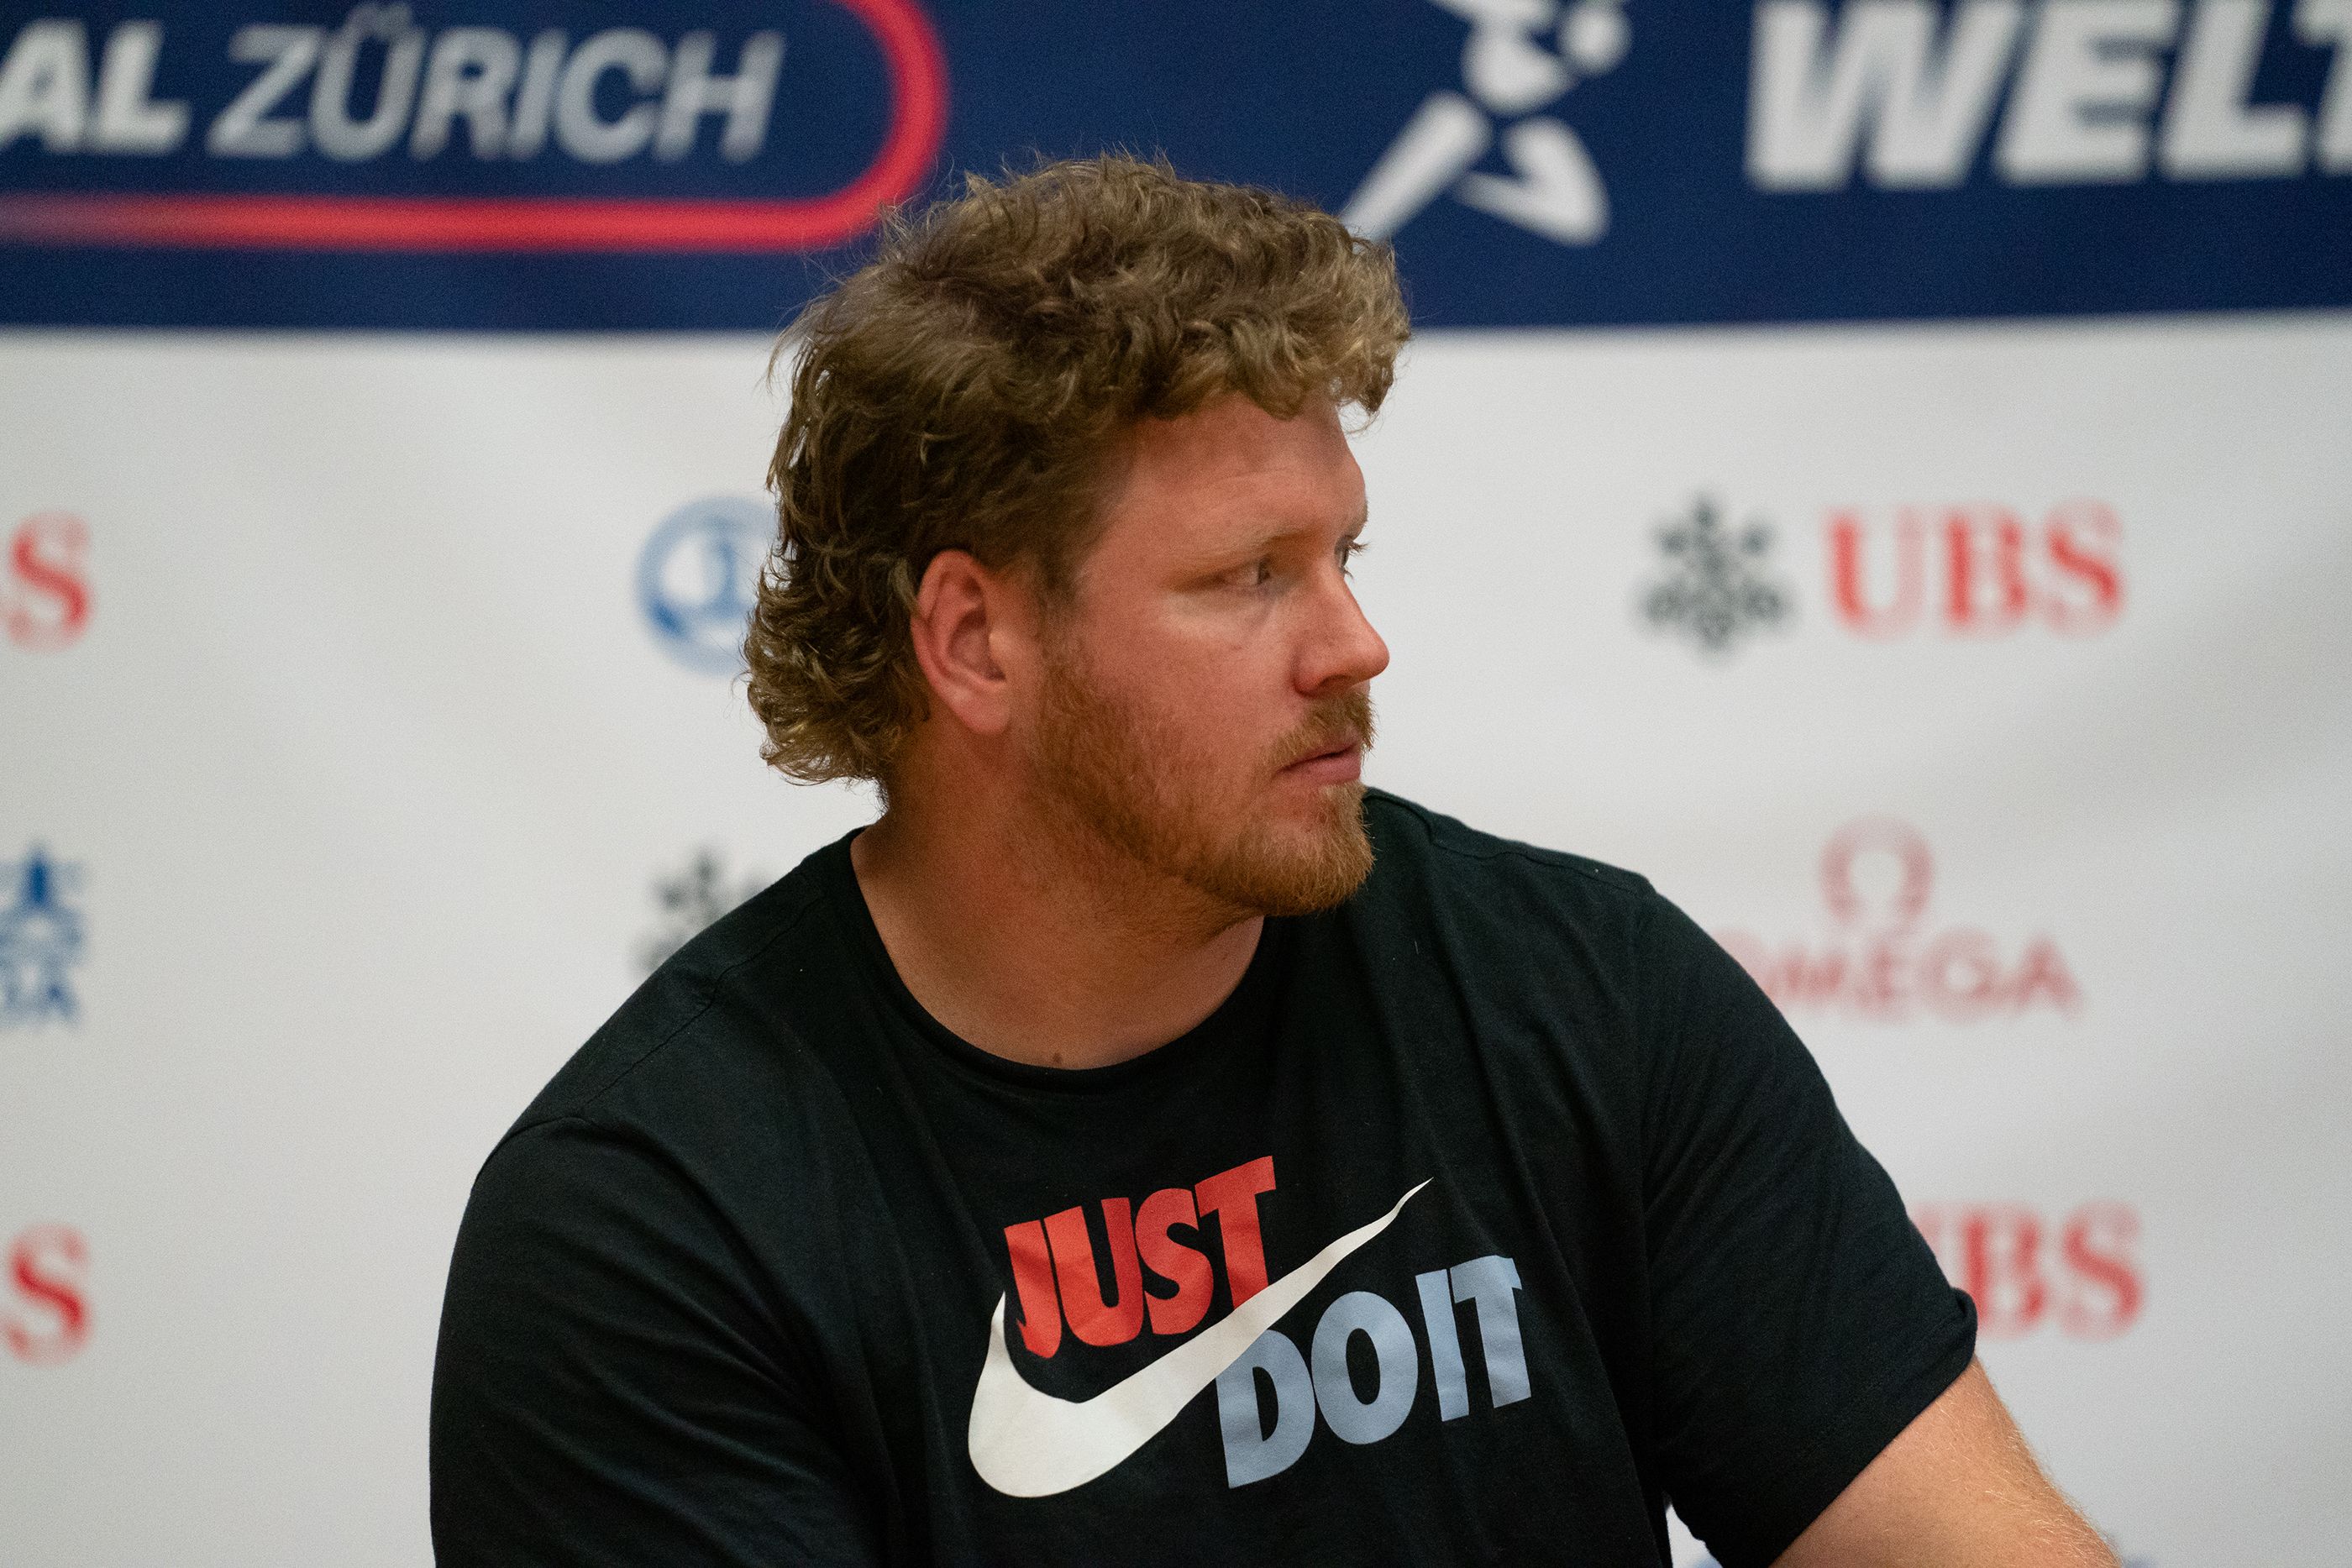 Ryan Crouser at the Wanda Diamond League Final press conference in Zurich